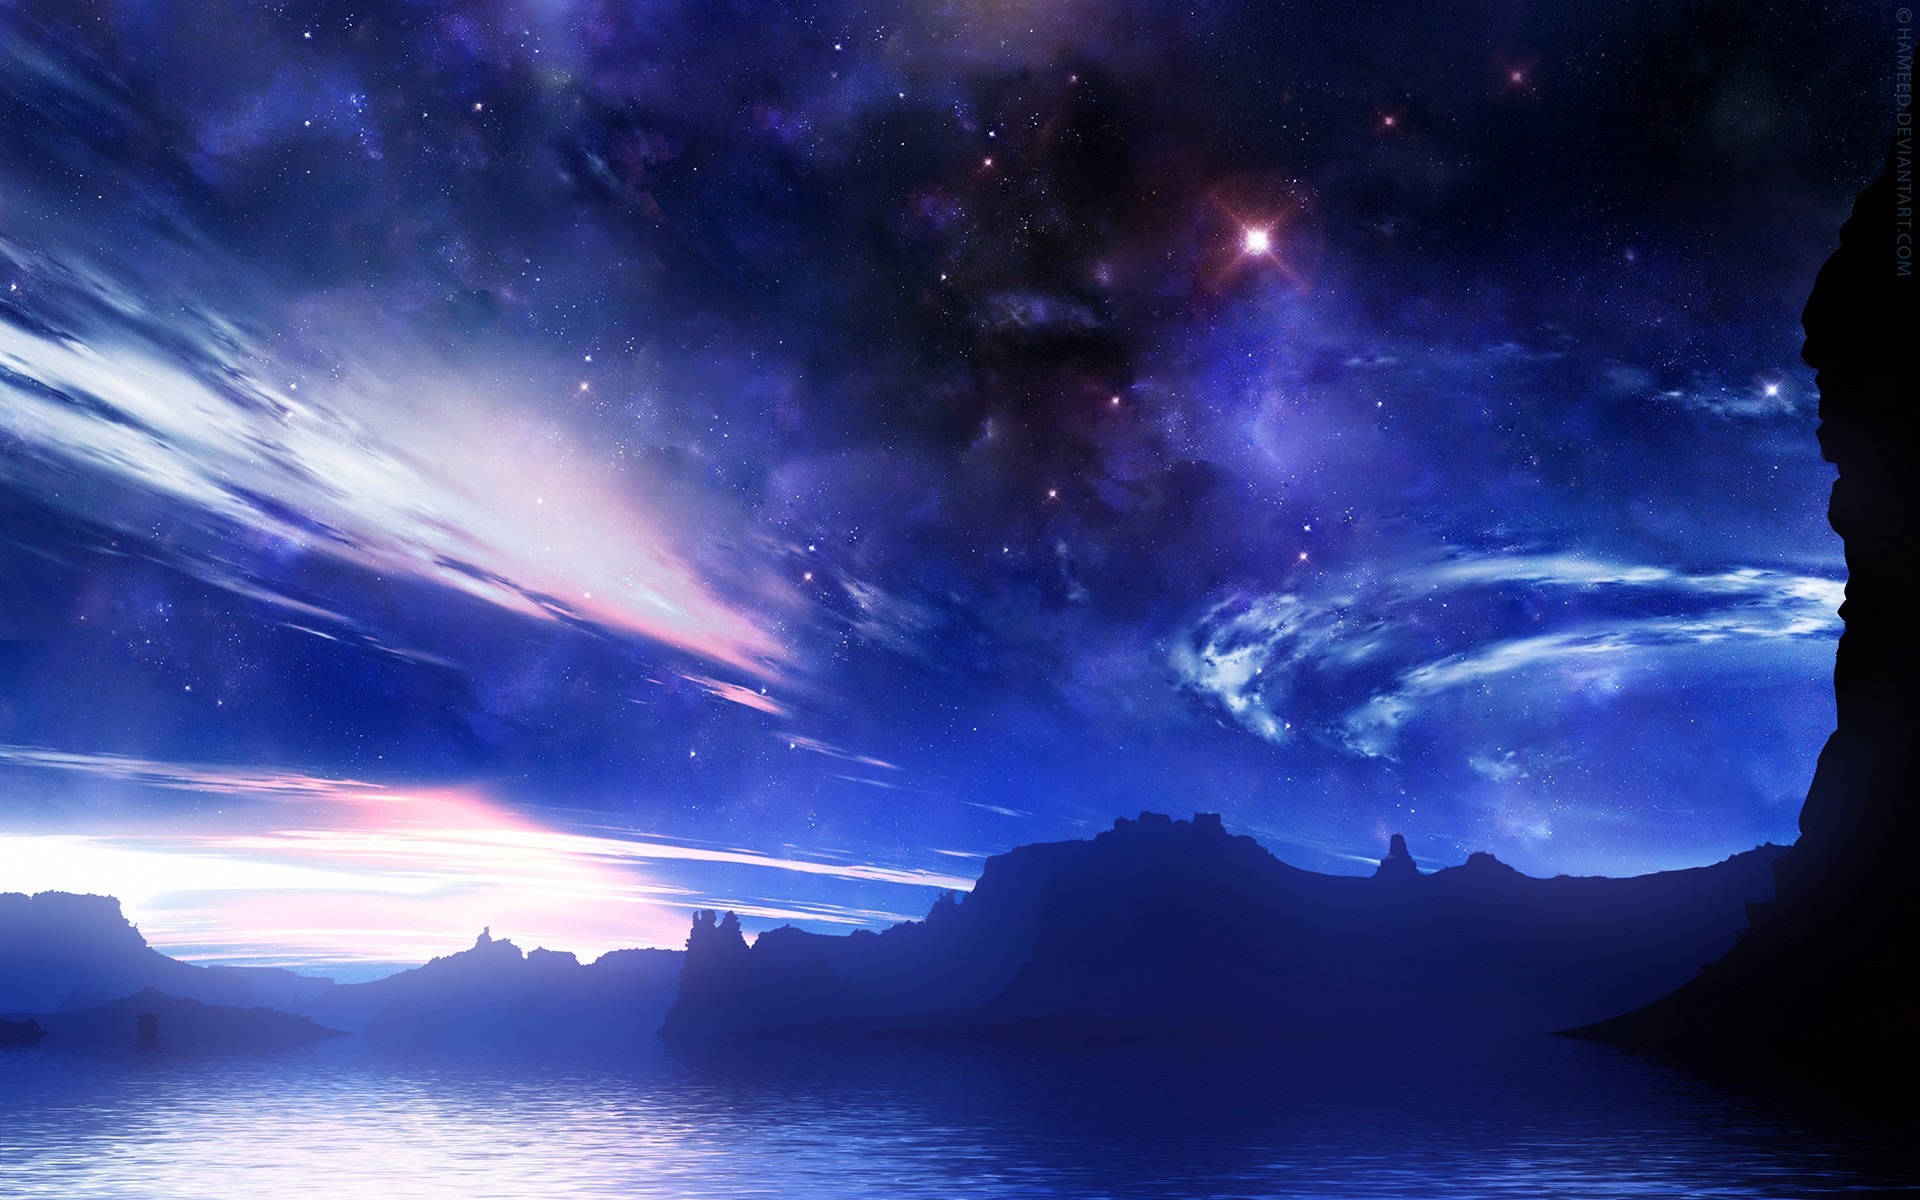 outer, Space, Stars, Silhouettes, Fantasy, Art, Waterscapes Wallpaper